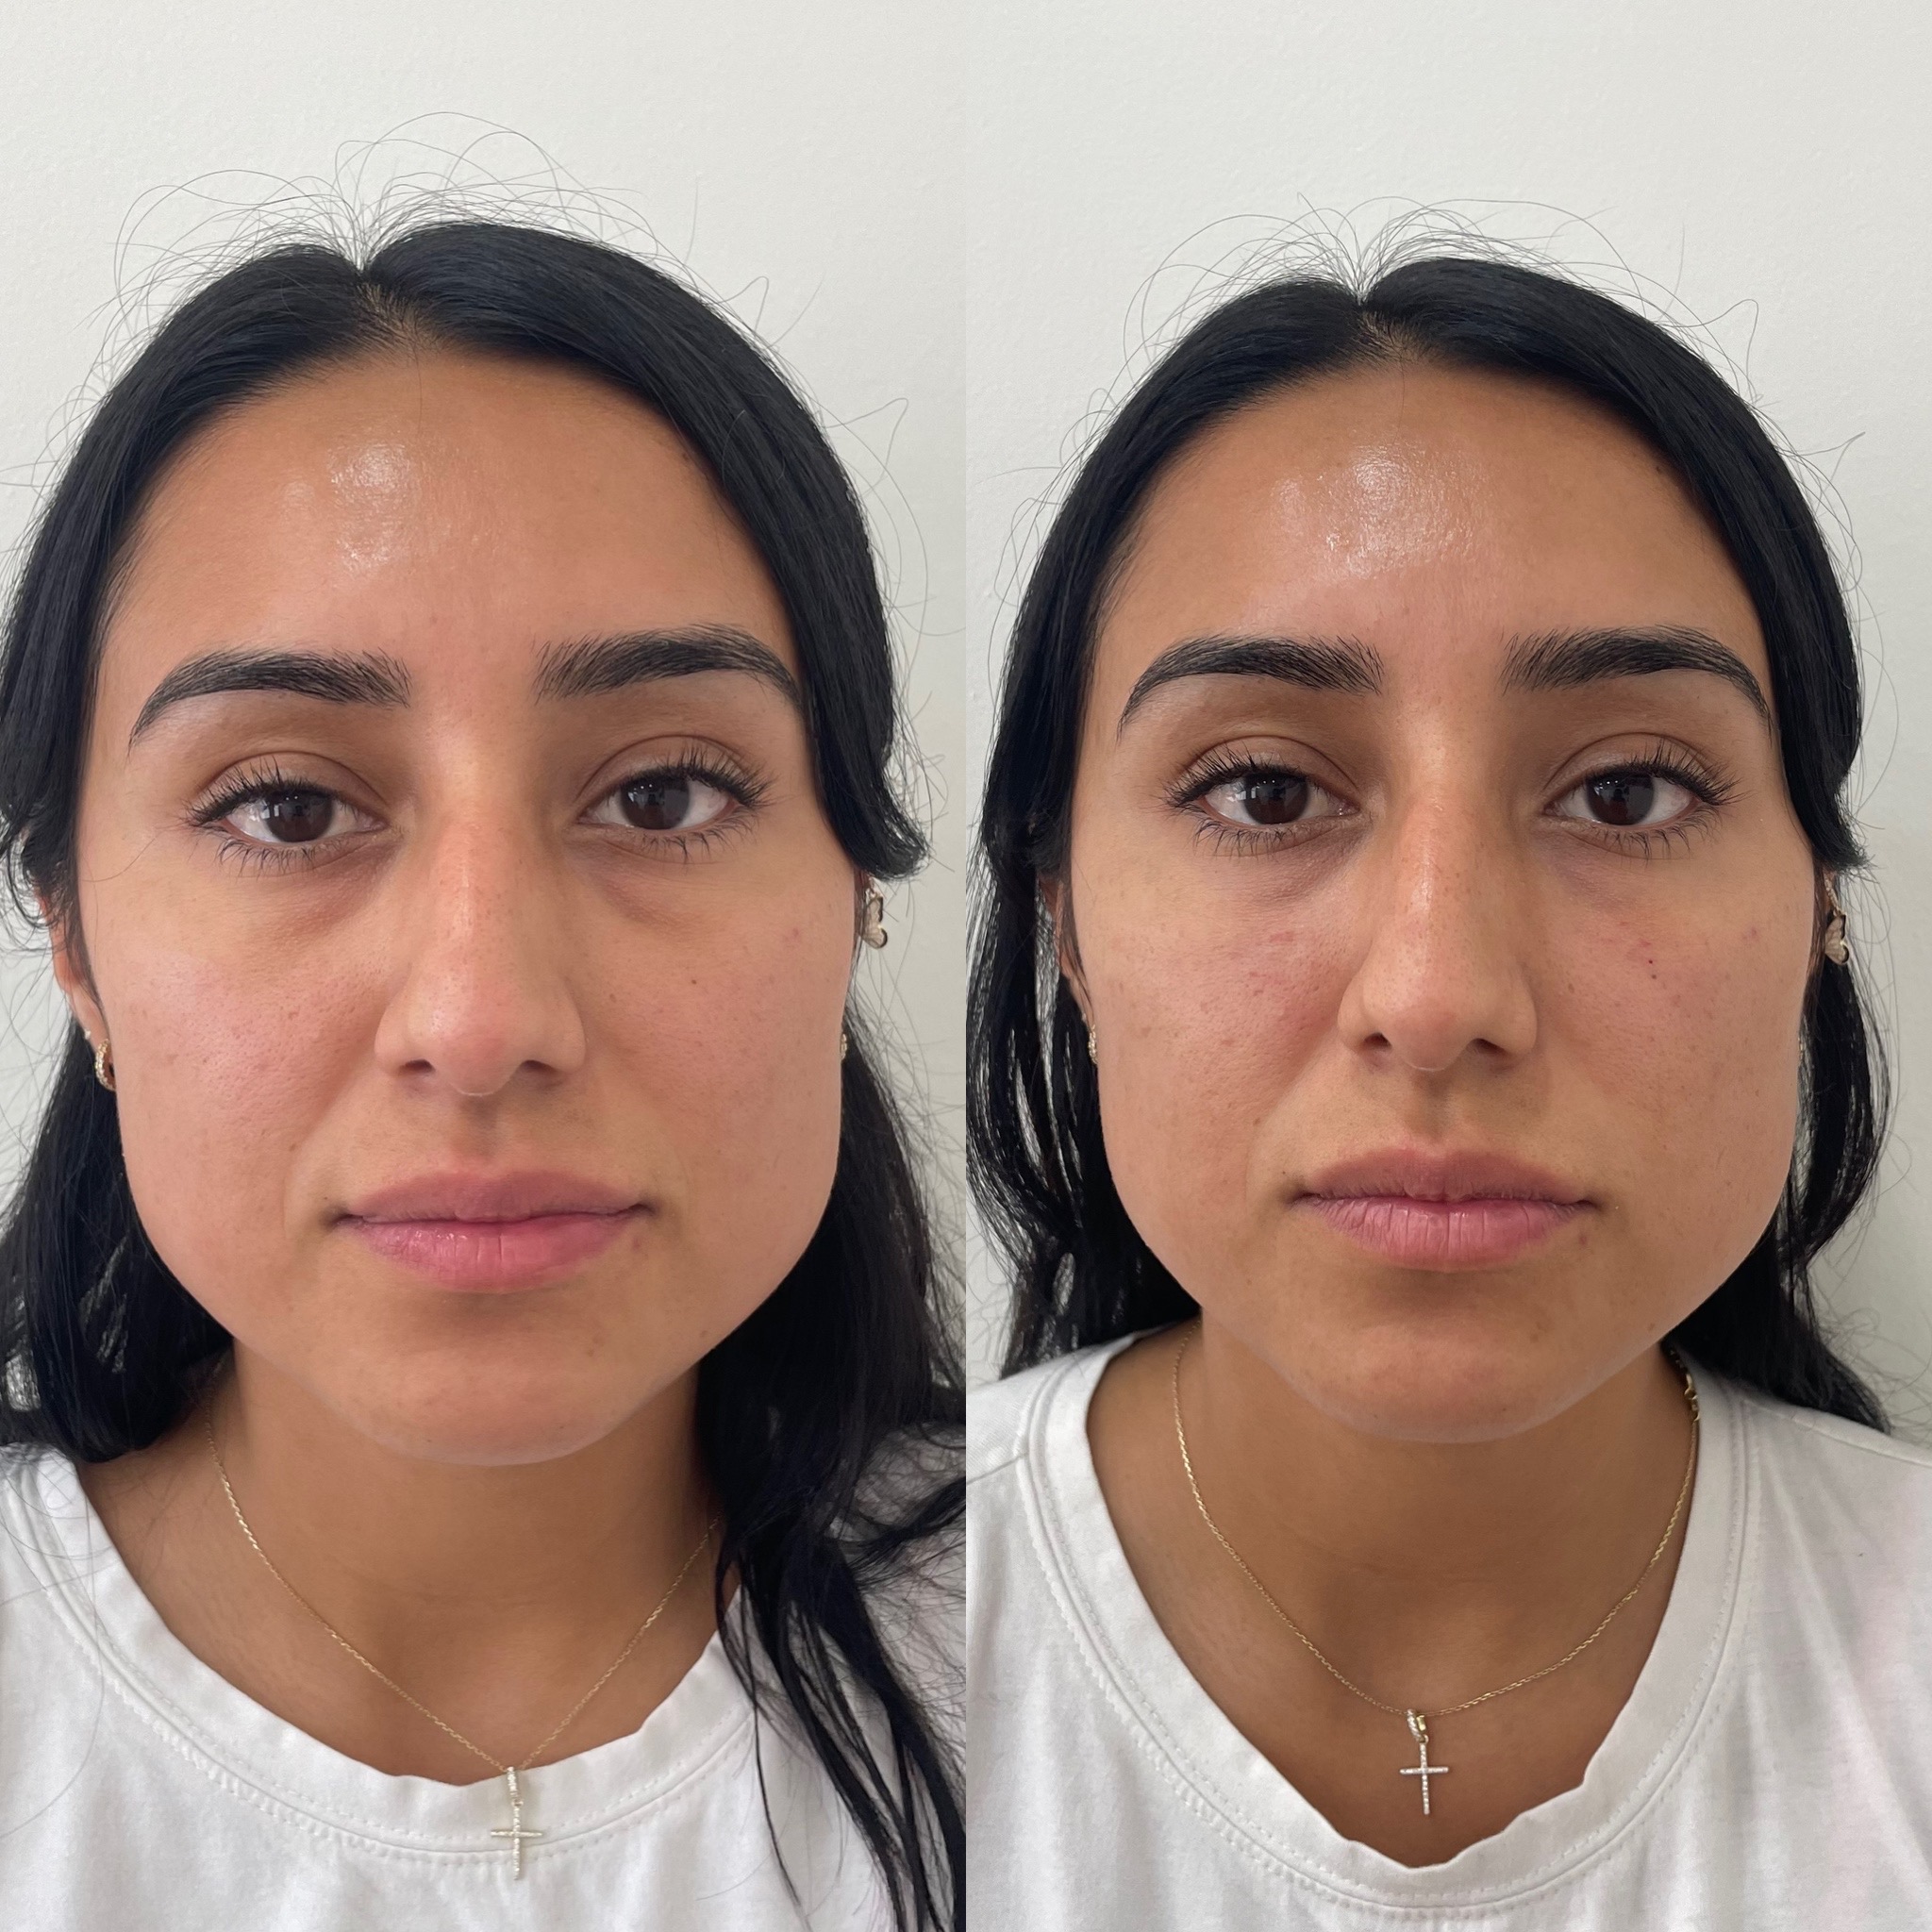 Before and After Undereyes Treatment | Beauty Boost Med Spa in Newport Beach, CA